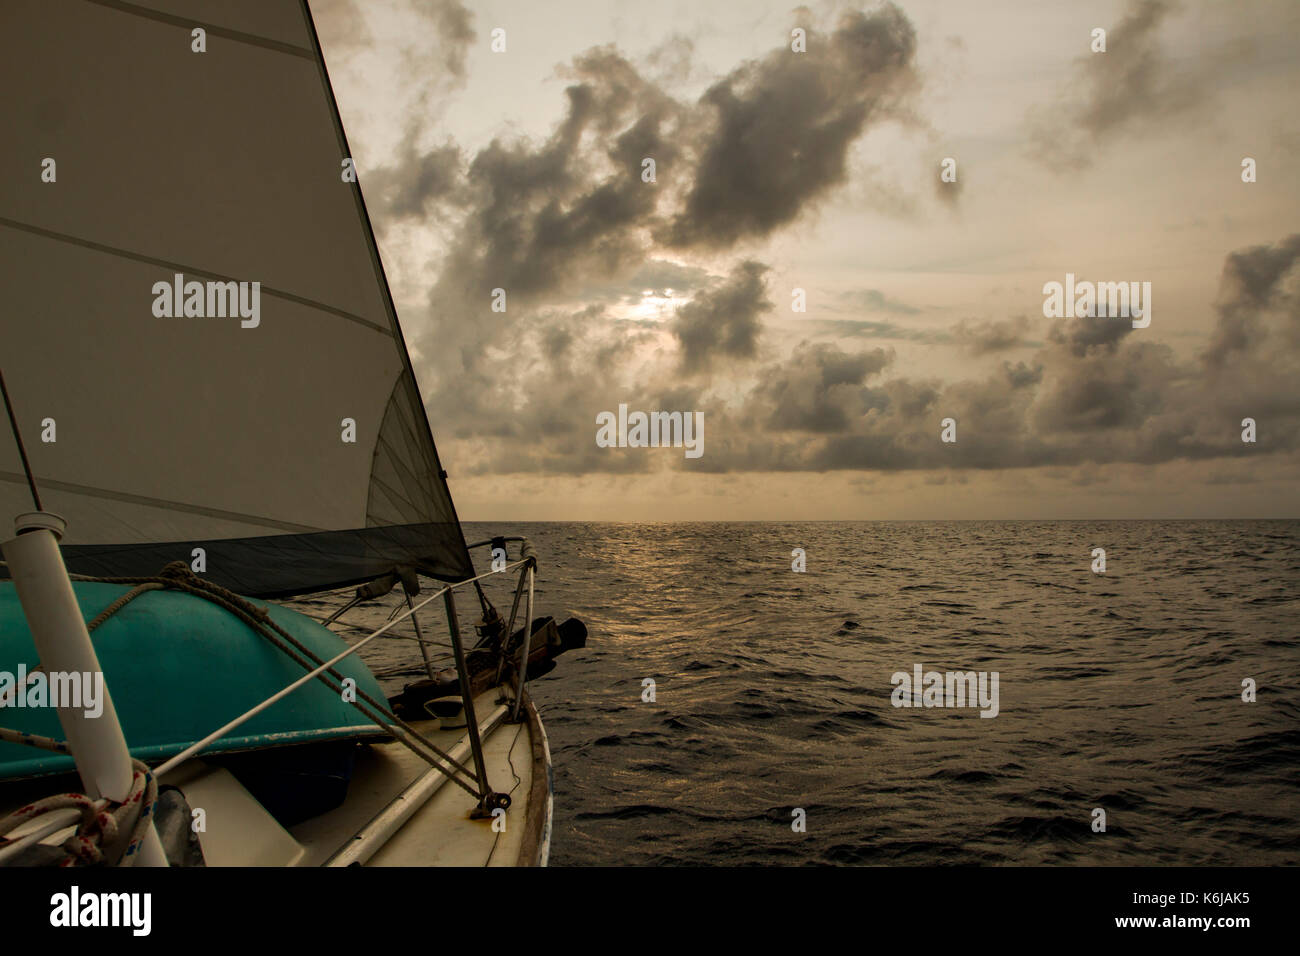 Bow of a sailboat cutting through water on journey over Caribbean Sea, Honduras Stock Photo